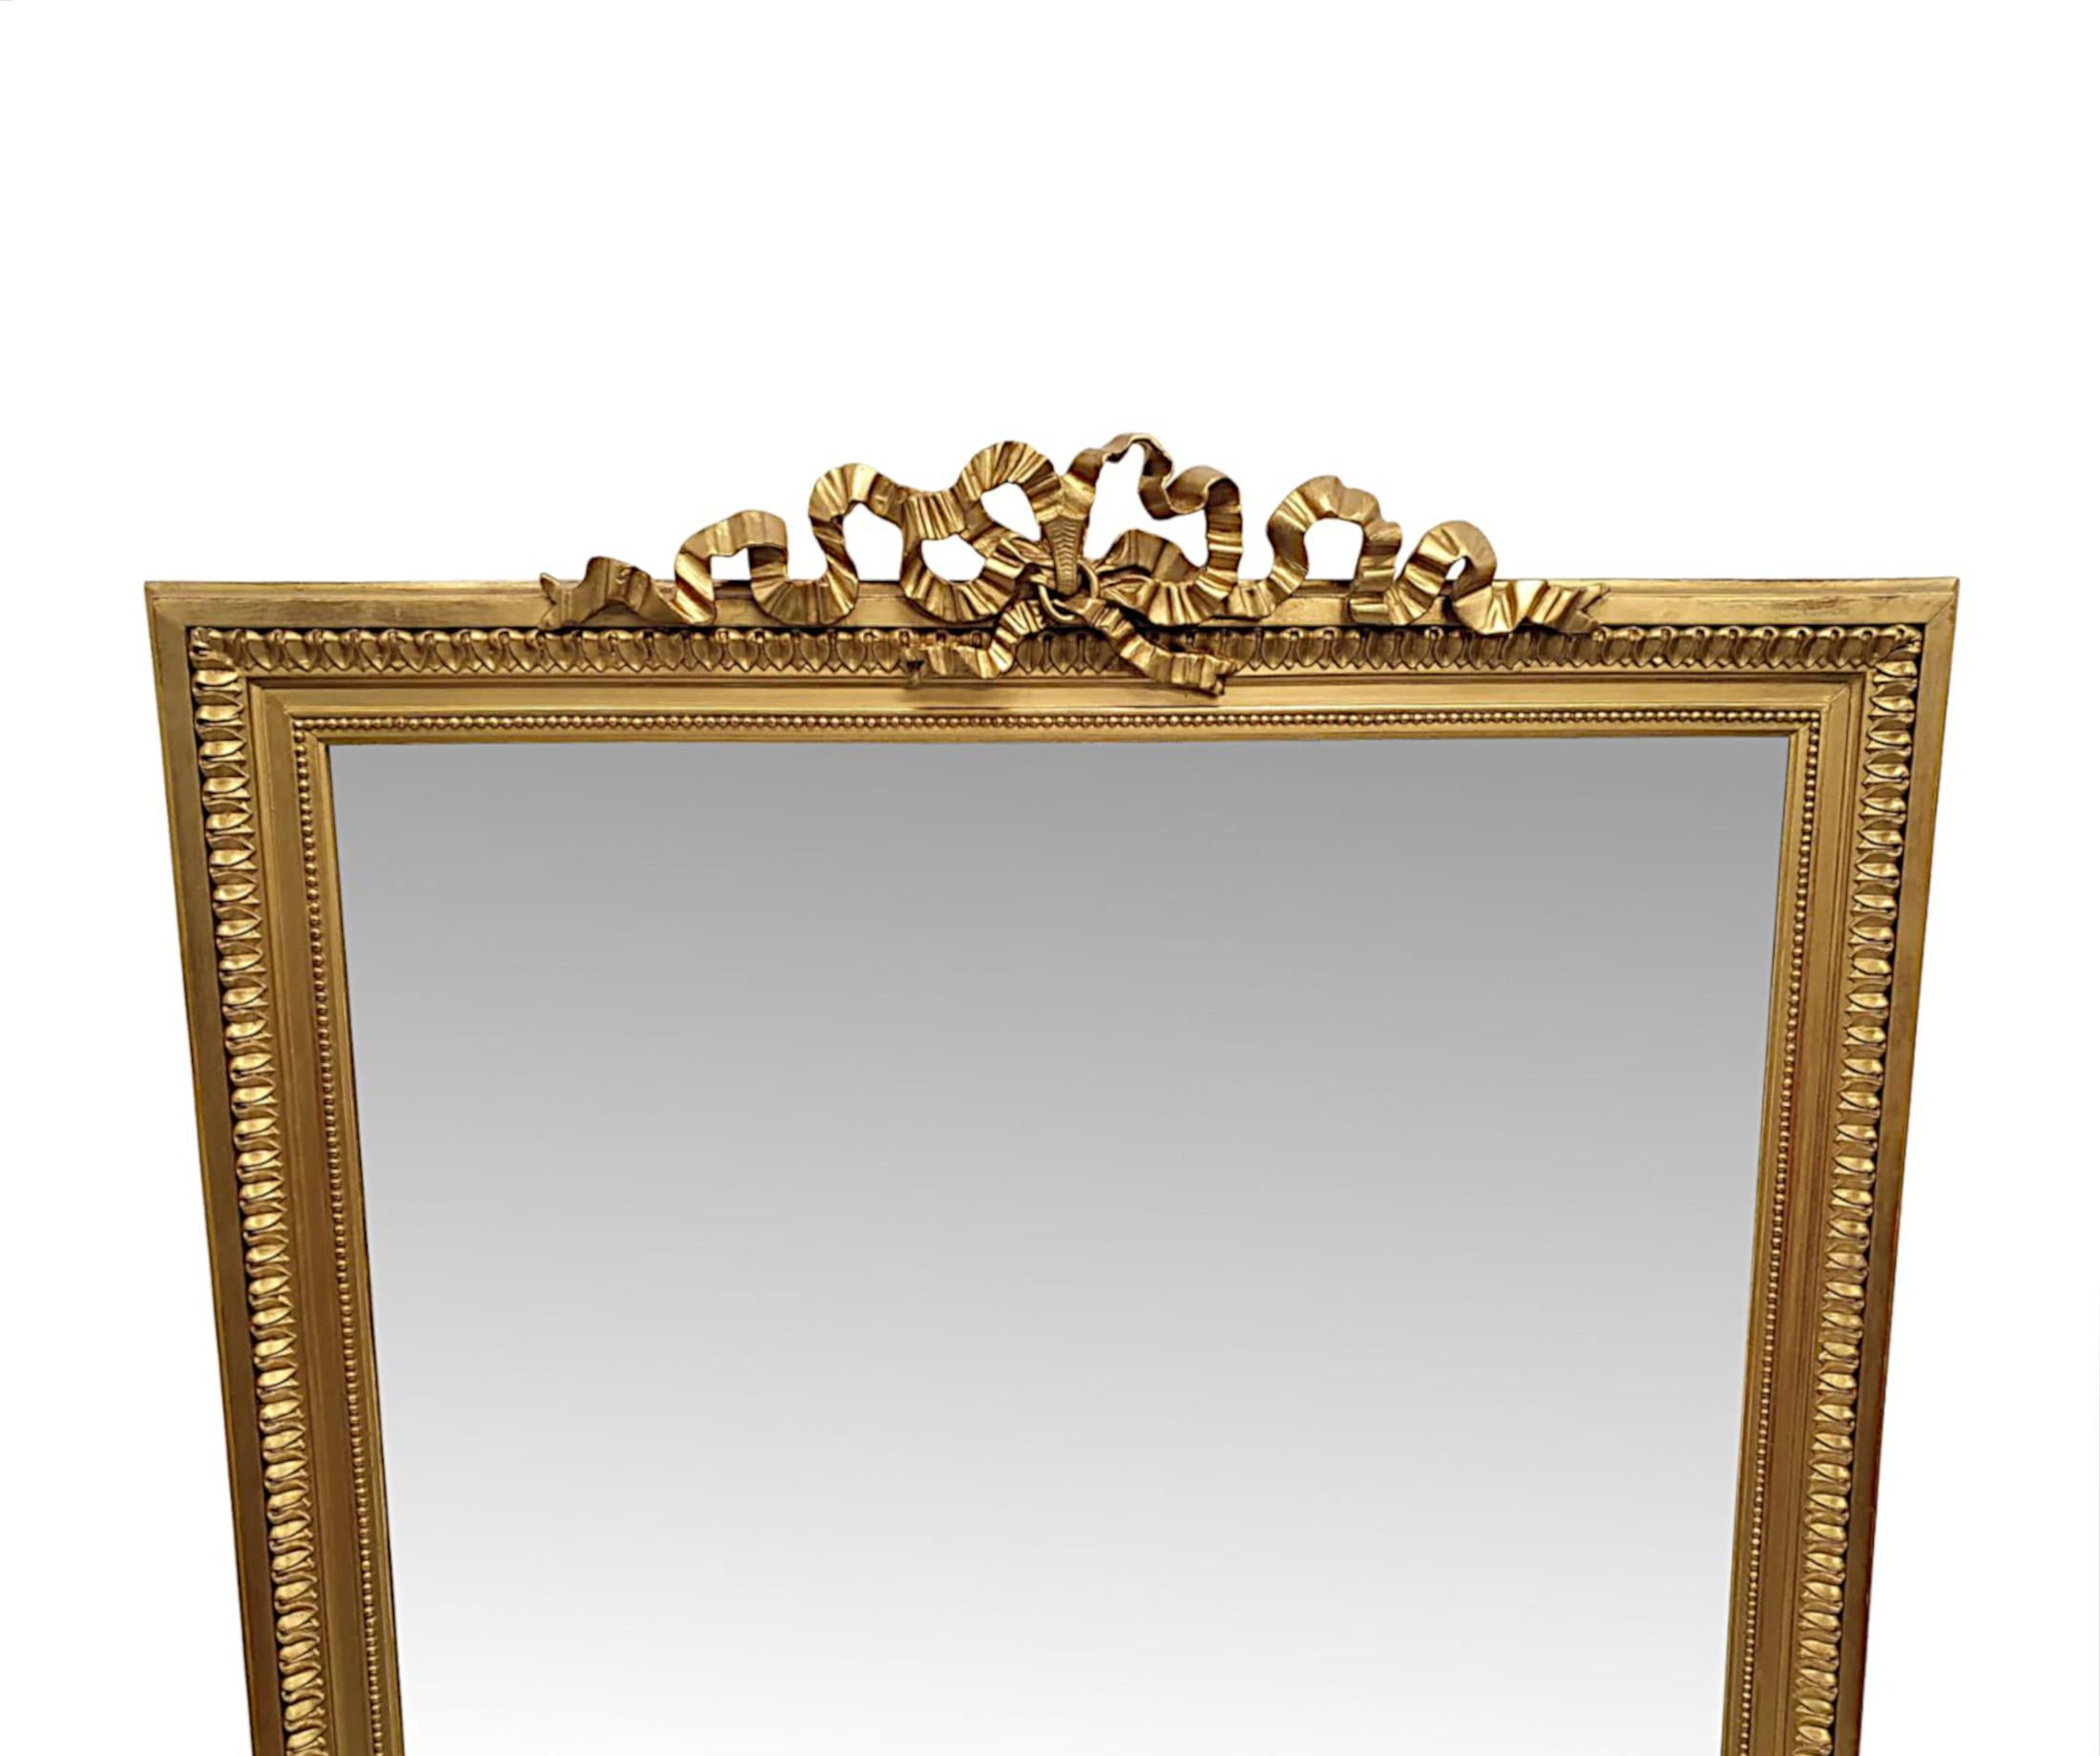 A stunning 19th century giltwood overmantle mirror of large proportions. The mirror glass plate of rectangular form set within a fabulously hand carved, moulded and pierced giltwood frame with gorgeous beaded row and lamb tongue alternating borders.